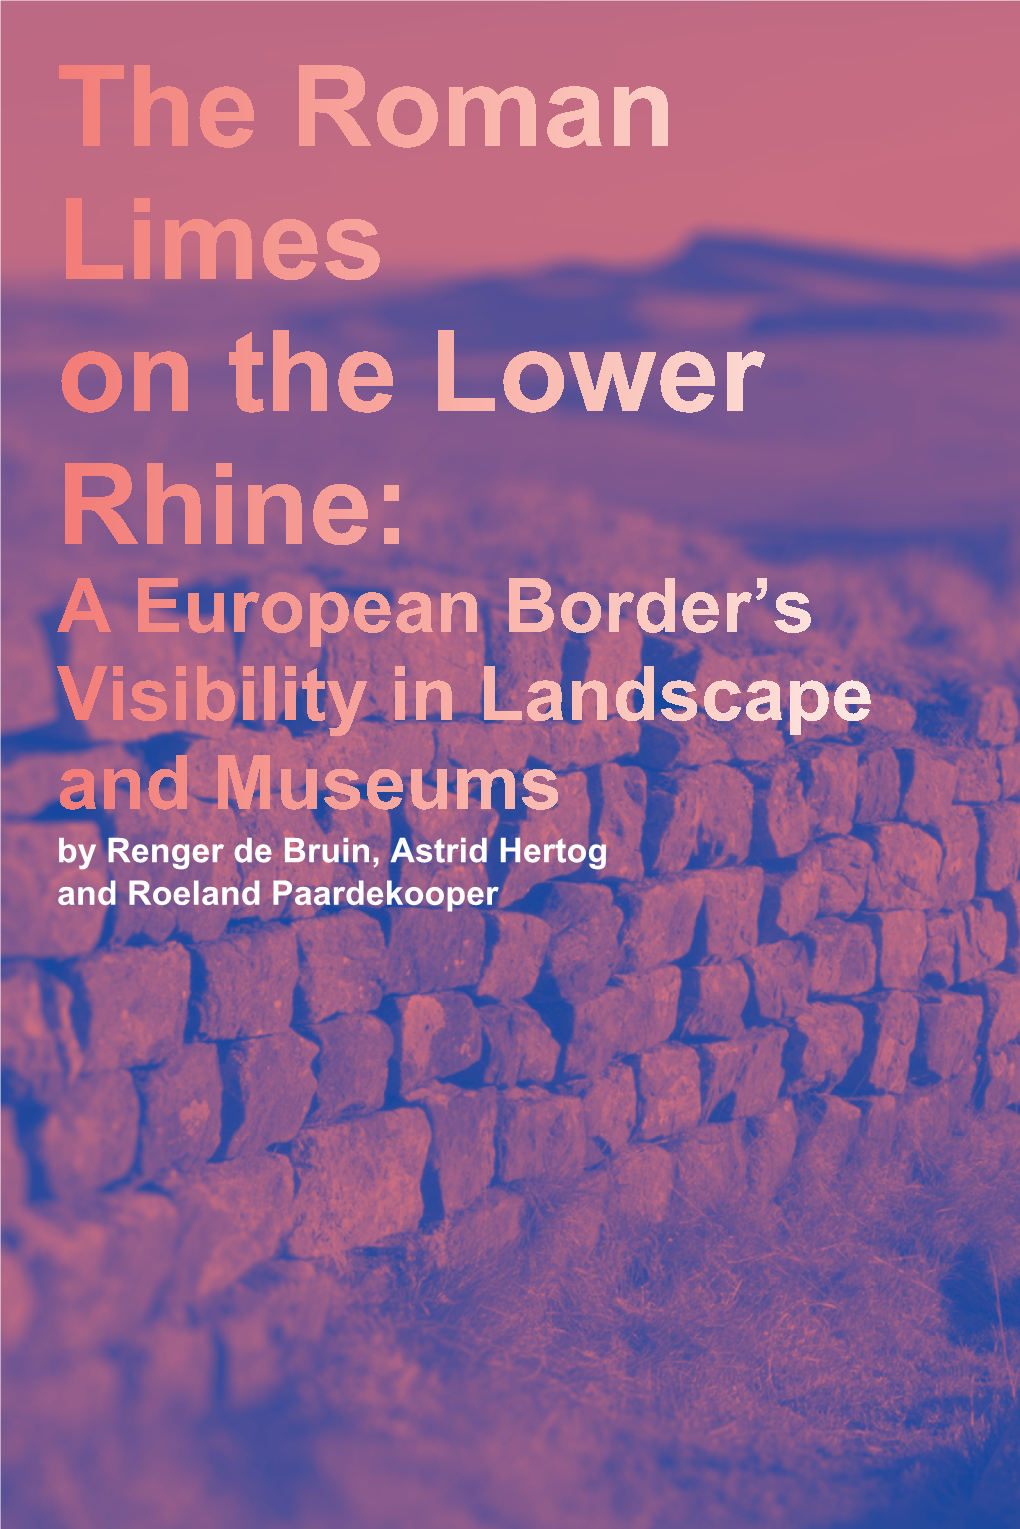 The Roman Limes on the Lower Rhine: a European Border’S Visibility in Landscape and Museums by Renger De Bruin, Astrid Hertog and Roeland Paardekooper